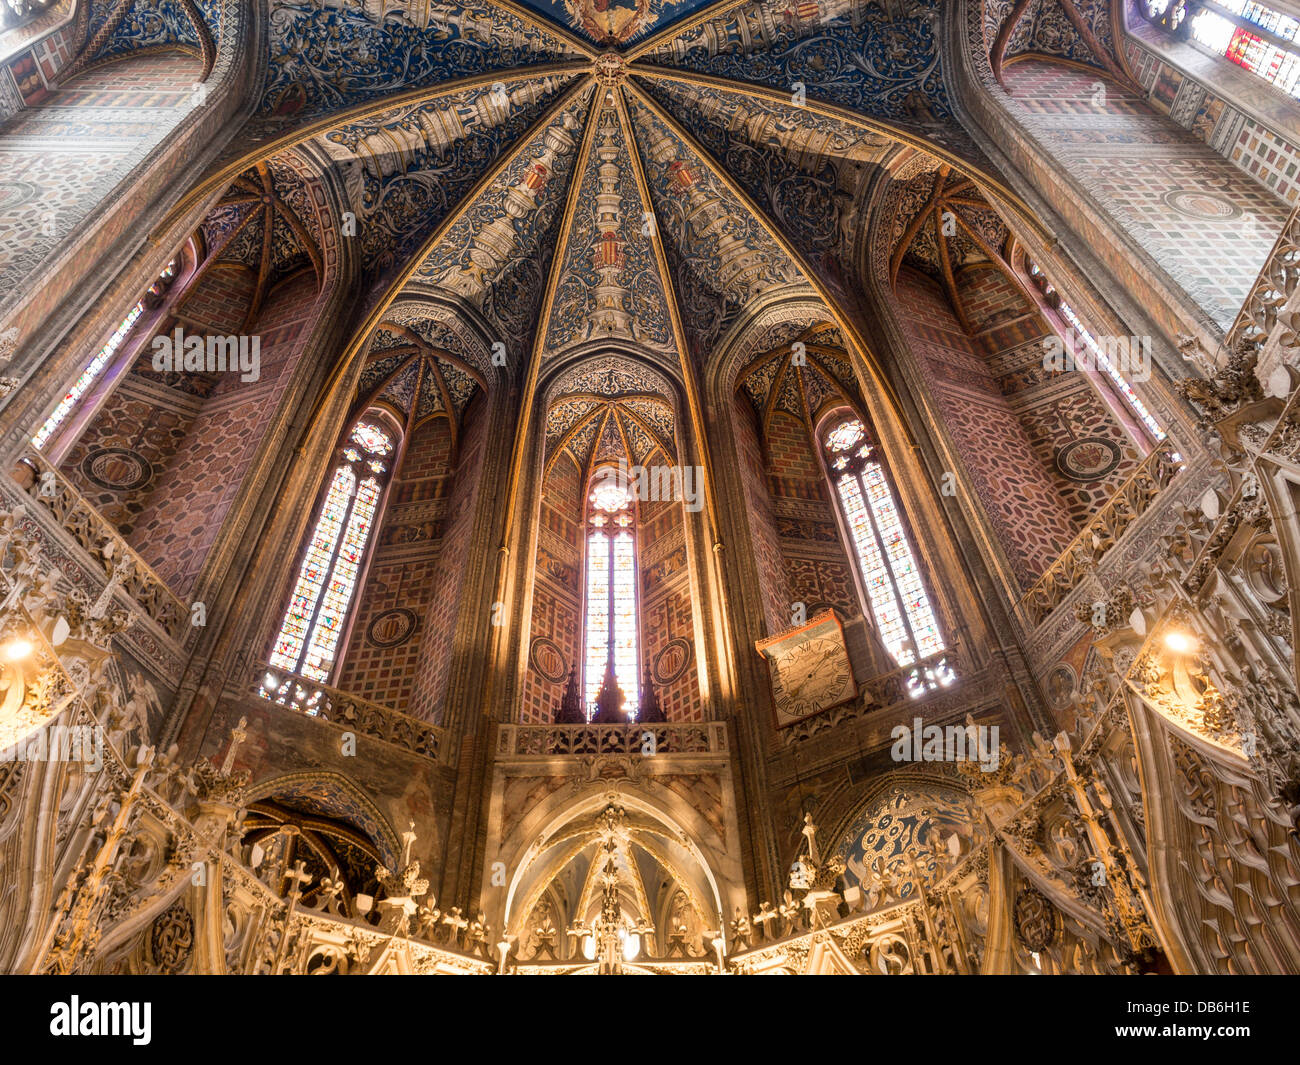 Dome above the Choir. The decorated dome and windows above the ornately carved choir at the Cathedral of Saint Cecil. Stock Photo